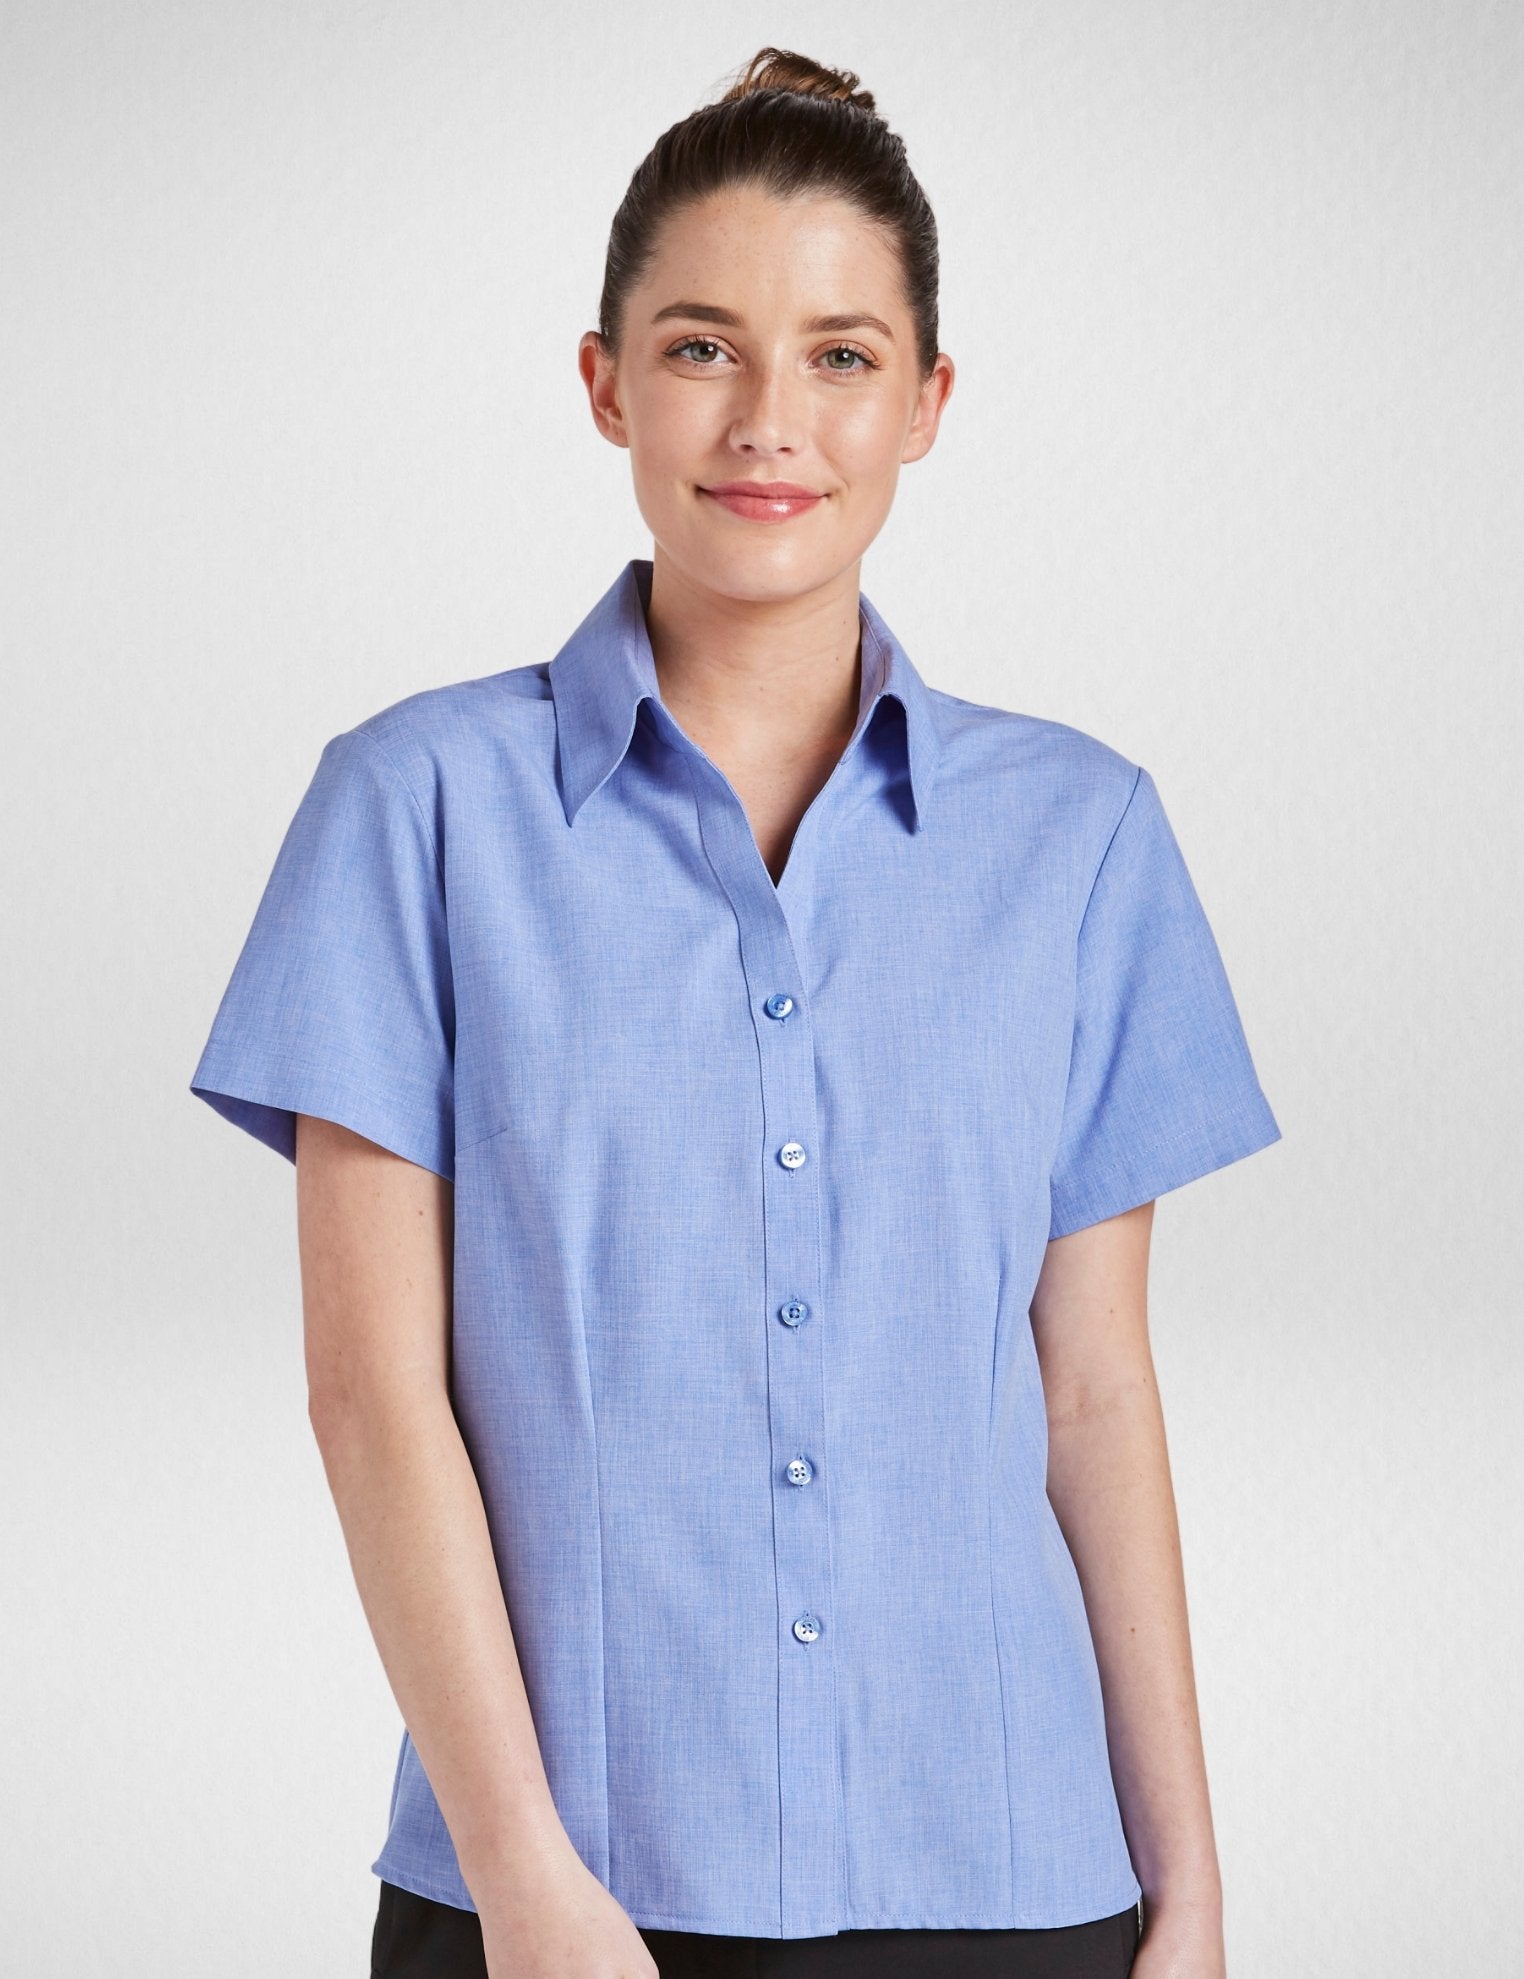 Climate Smart - Ladies semi fit short sleeve (sizes 6-28) - Corporate Reflection